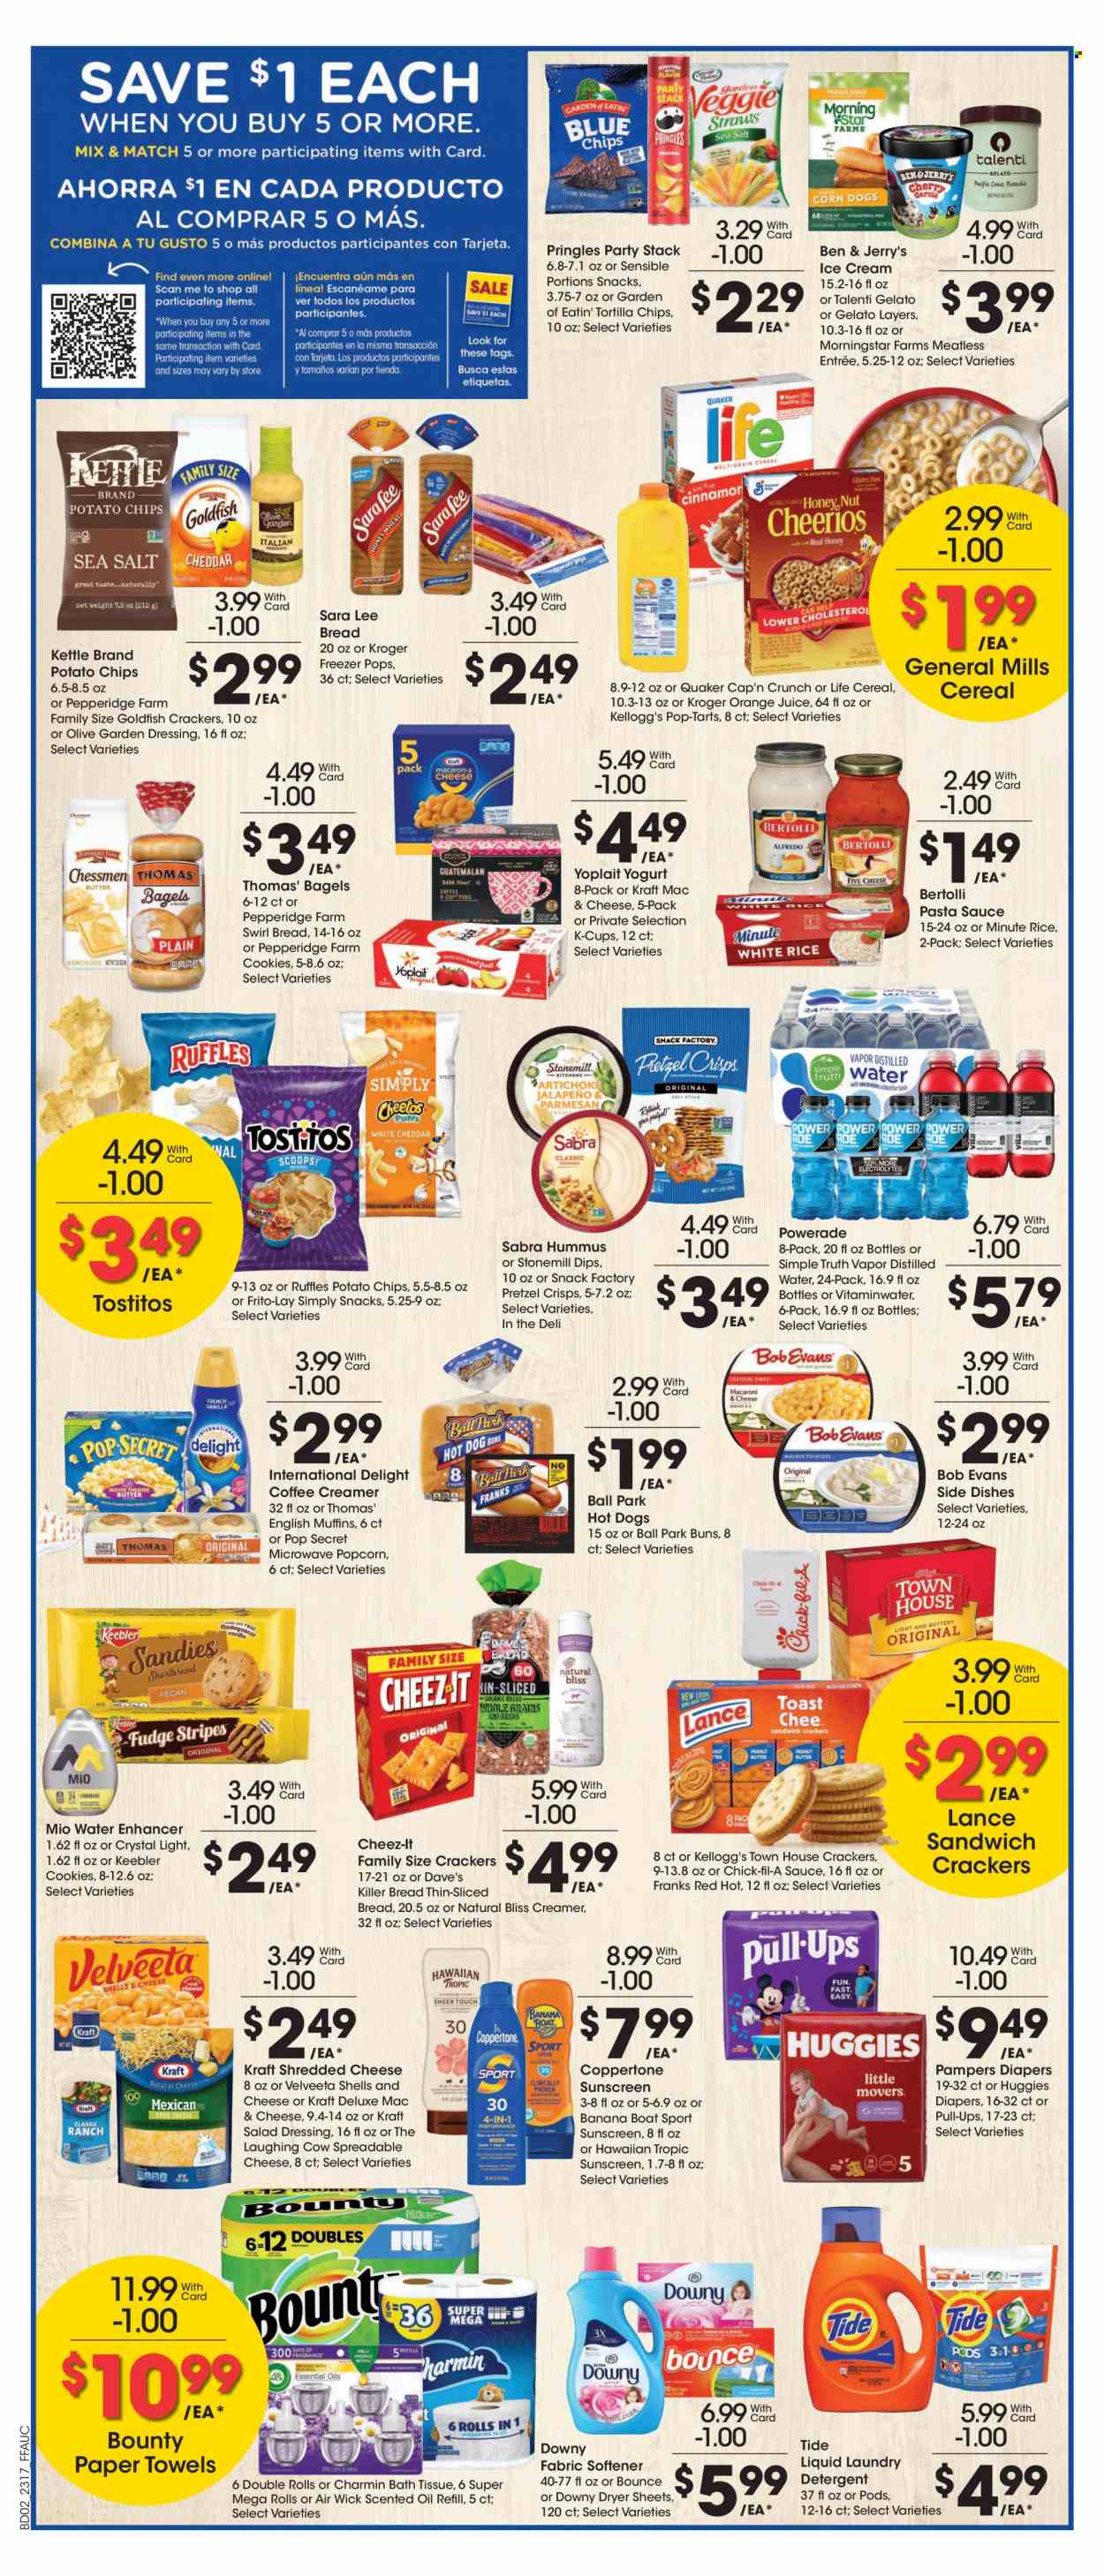 thumbnail - Fry’s Flyer - 05/24/2023 - 05/30/2023 - Sales products - bagels, buns, Sara Lee, hot dog, pasta sauce, Quaker, MorningStar Farms, Kraft®, Bob Evans, Bertolli, frankfurters, hummus, shredded cheese, The Laughing Cow, Yoplait, creamer, ice cream, Ben & Jerry's, Talenti Gelato, gelato, cookies, Bounty, crackers, Kellogg's, Pop-Tarts, Keebler, tortilla chips, potato chips, Pringles, chips, popcorn, Frito-Lay, Cheez-It, Tostitos, pretzel crisps, salty snack, cereals, Cap'n Crunch, rice, salad dressing, dressing, syrup, Powerade, orange juice, juice, energy drink, coffee capsules, K-Cups, Huggies, Pampers, nappies, bath tissue, kitchen towels, paper towels, Charmin, detergent, Tide, fabric softener, laundry detergent, dryer sheets, Downy Laundry, Hawaiian Tropic, Air Wick, scented oil, freezer. Page 6.